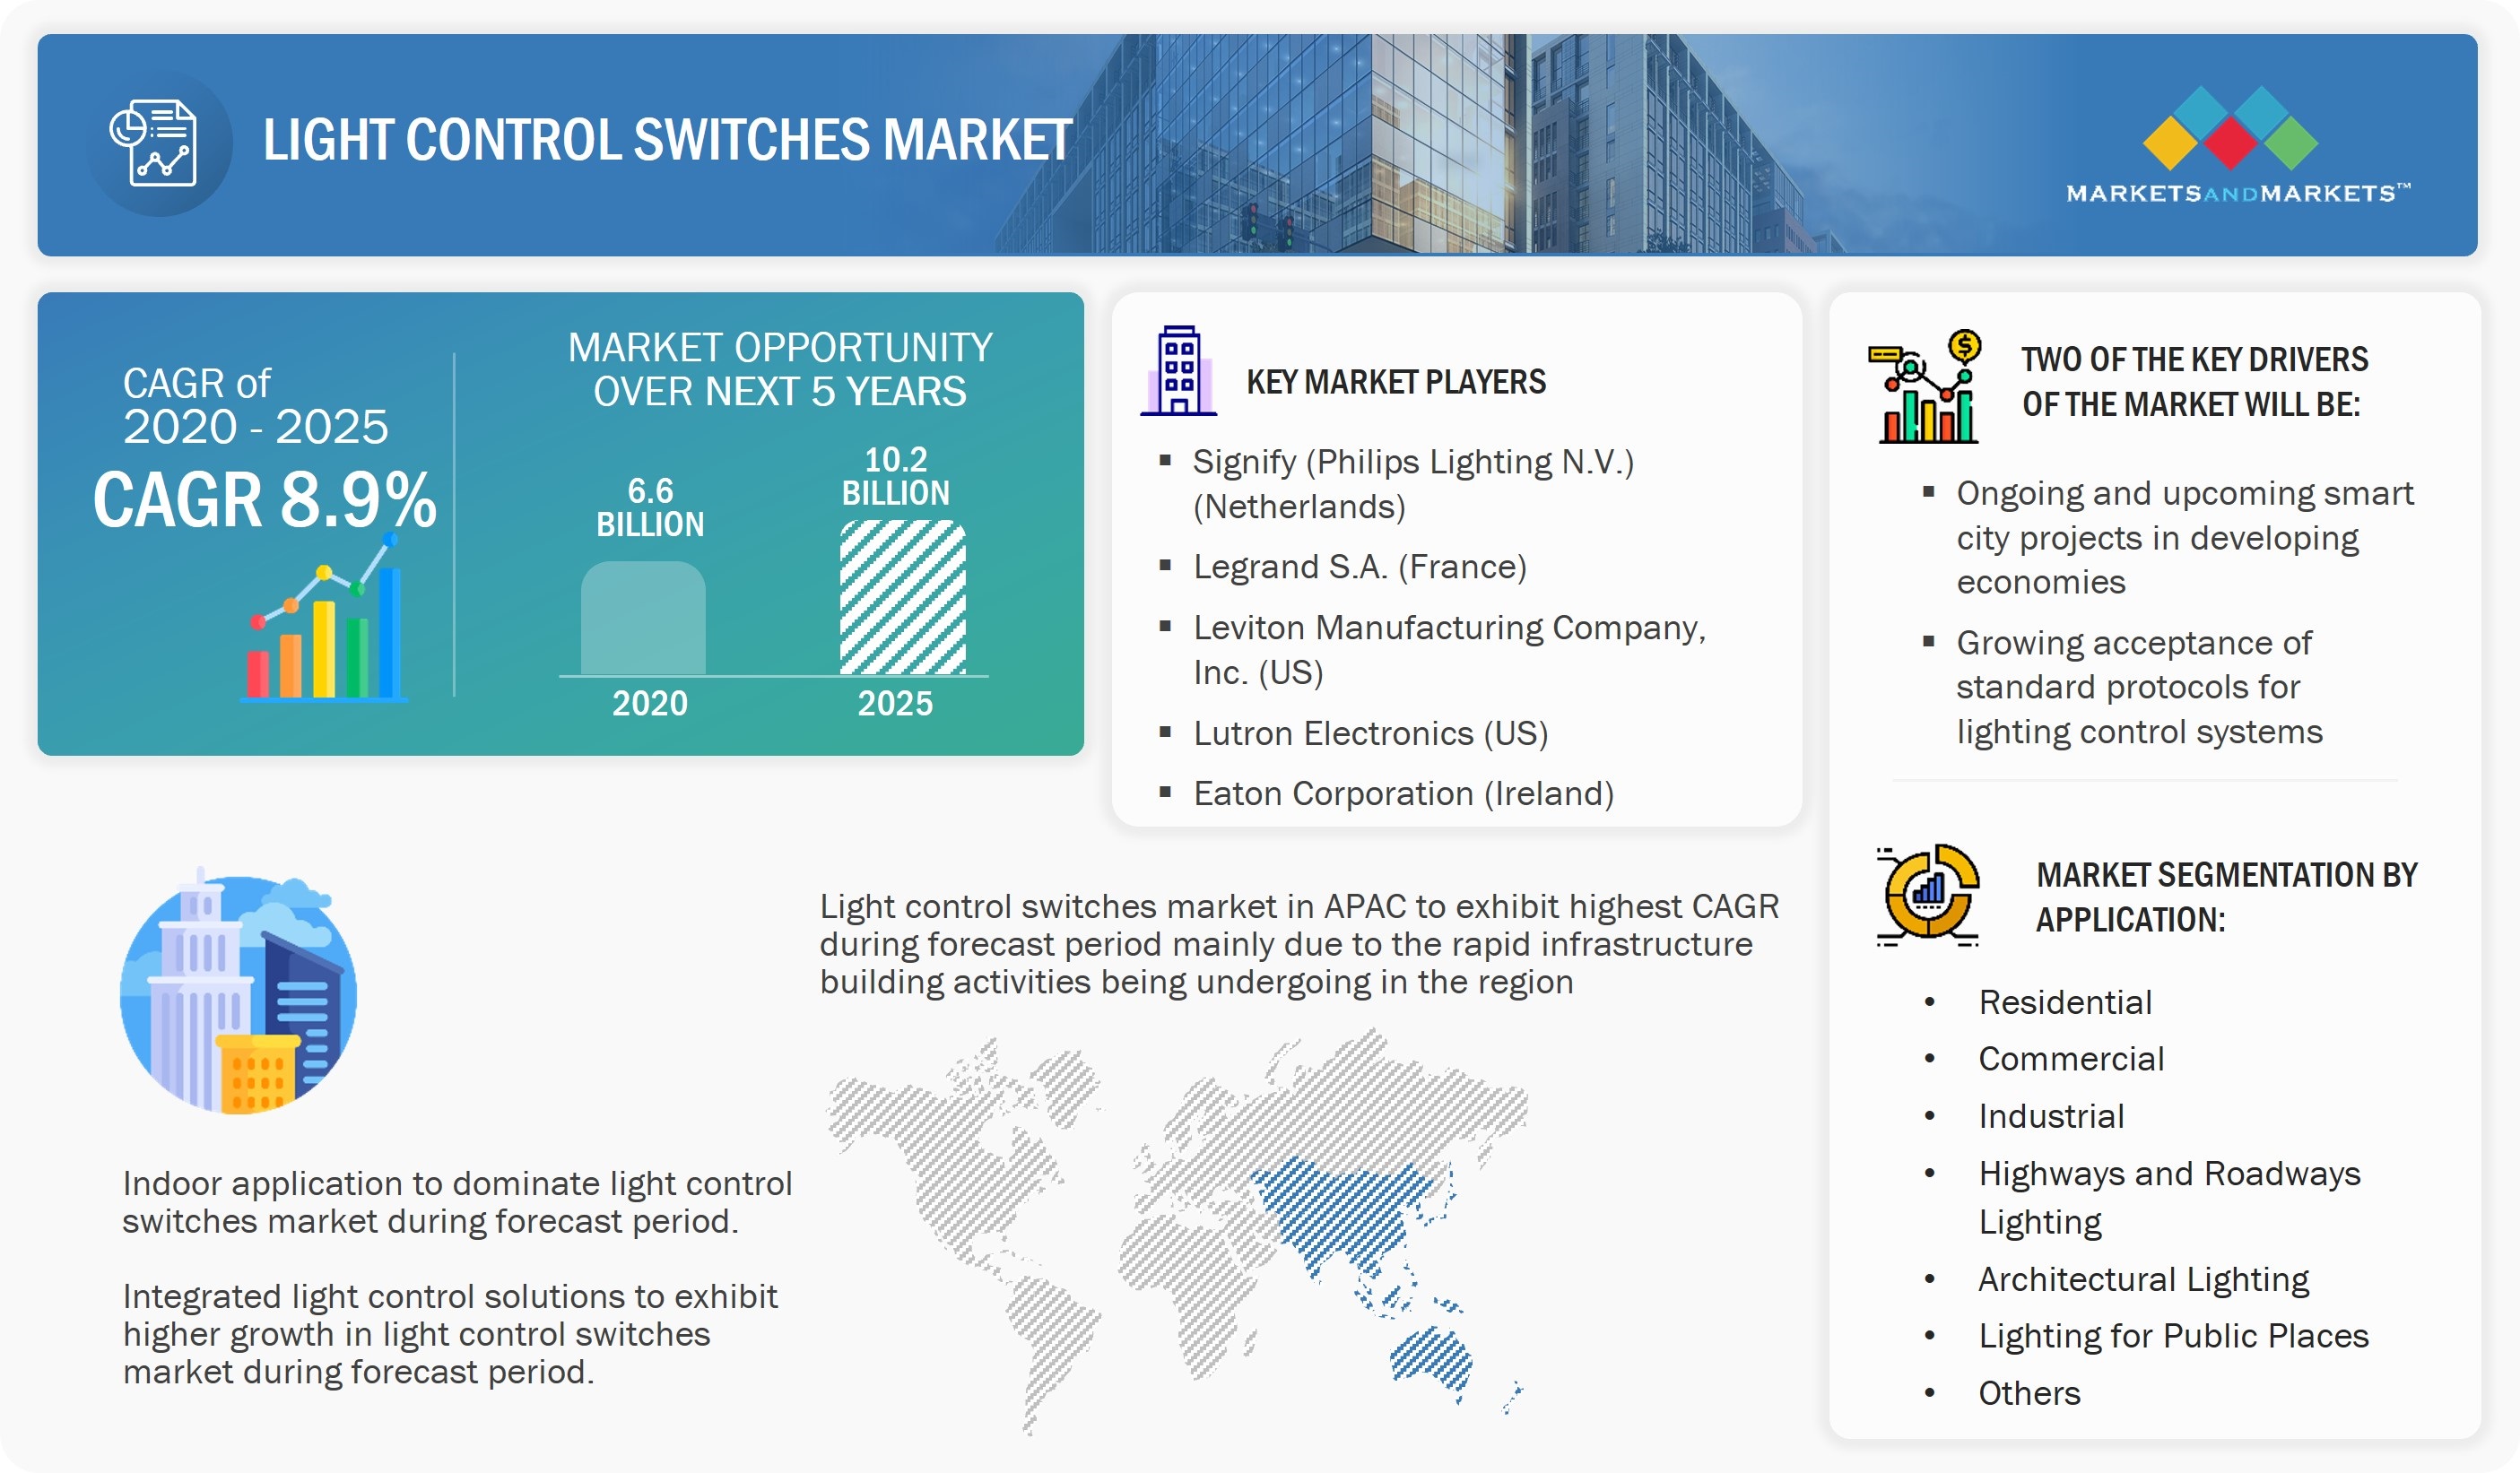 Light Control Switches Market by Highlights